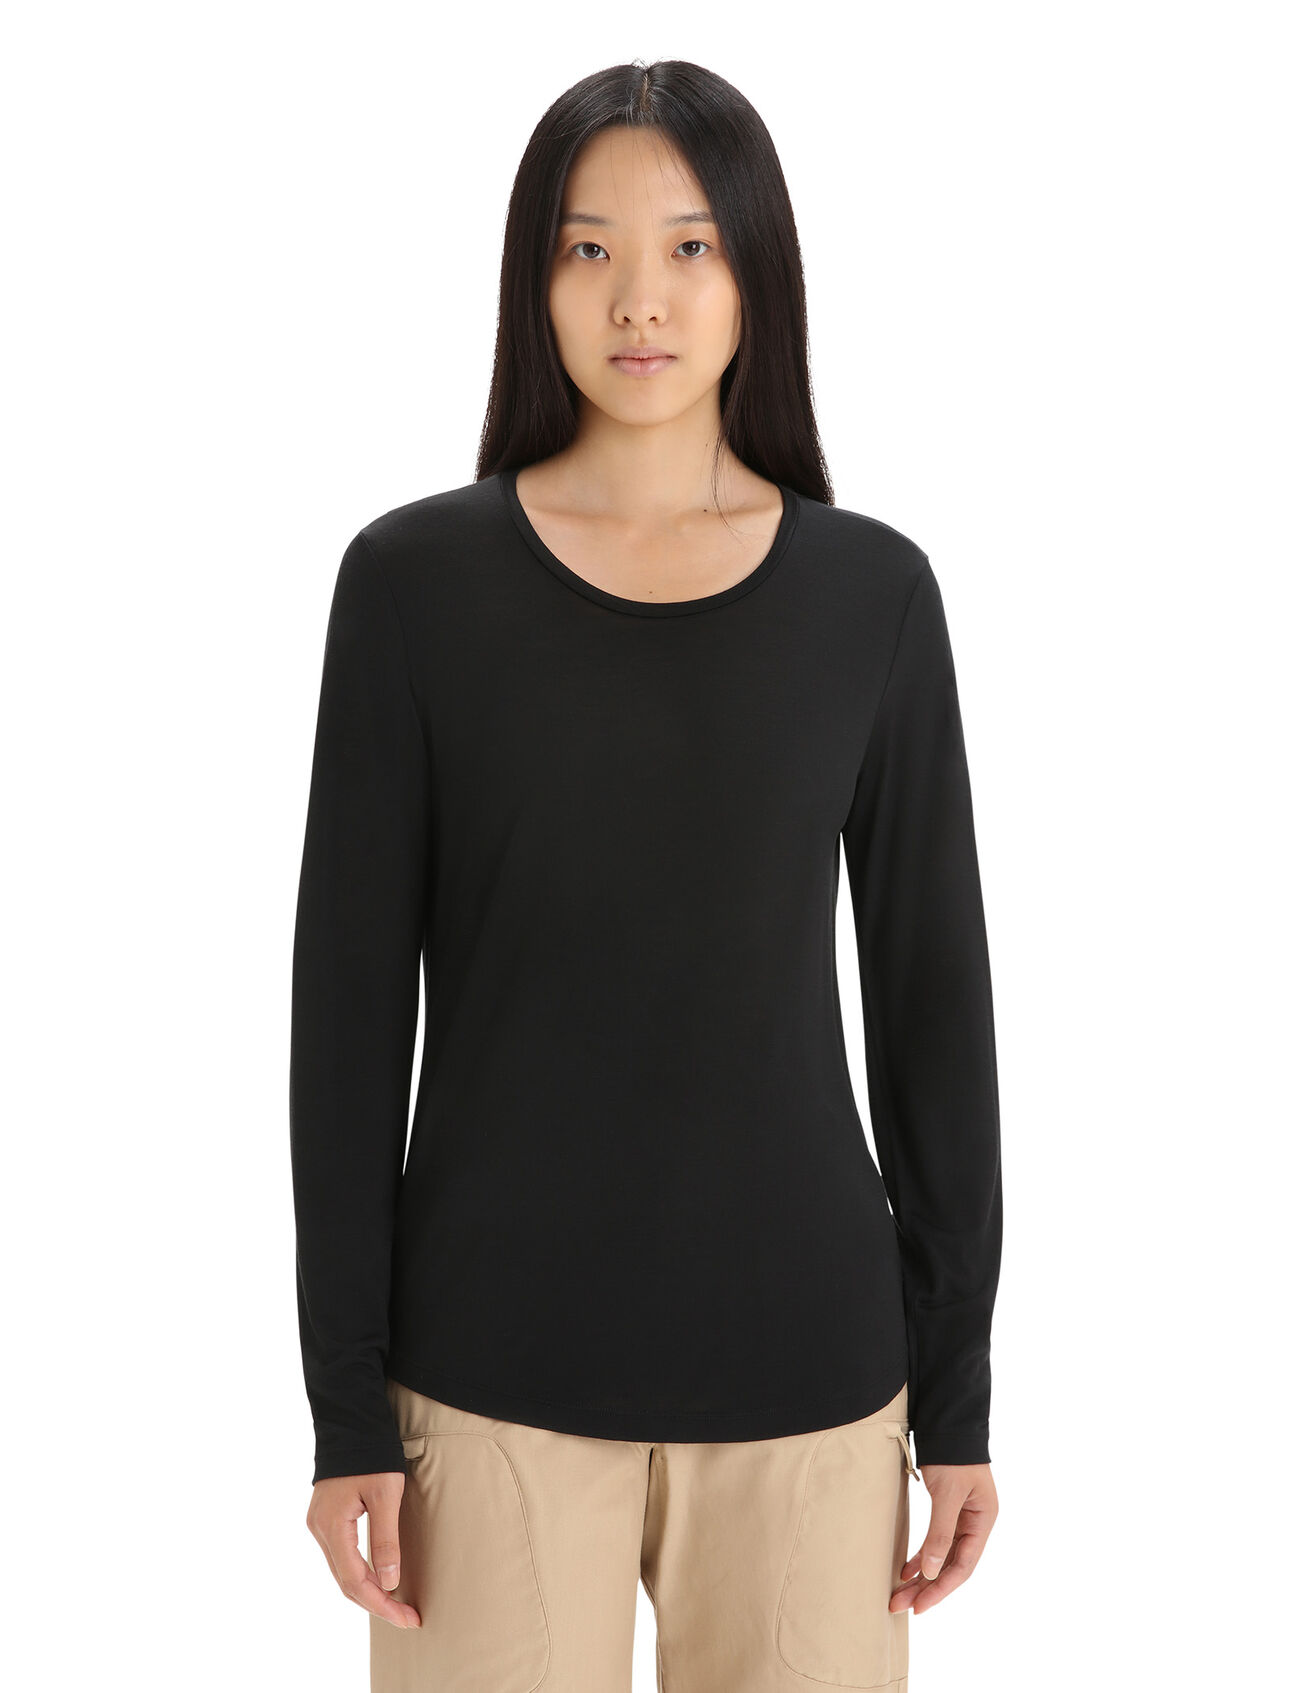 Womens Merino Sphere II Long Sleeve Tee A soft merino-blend tee made with our lightweight Cool-Lite™ jersey fabric, the Sphere II Long Sleeve Tee provides natural breathability, odor resistance and comfort.